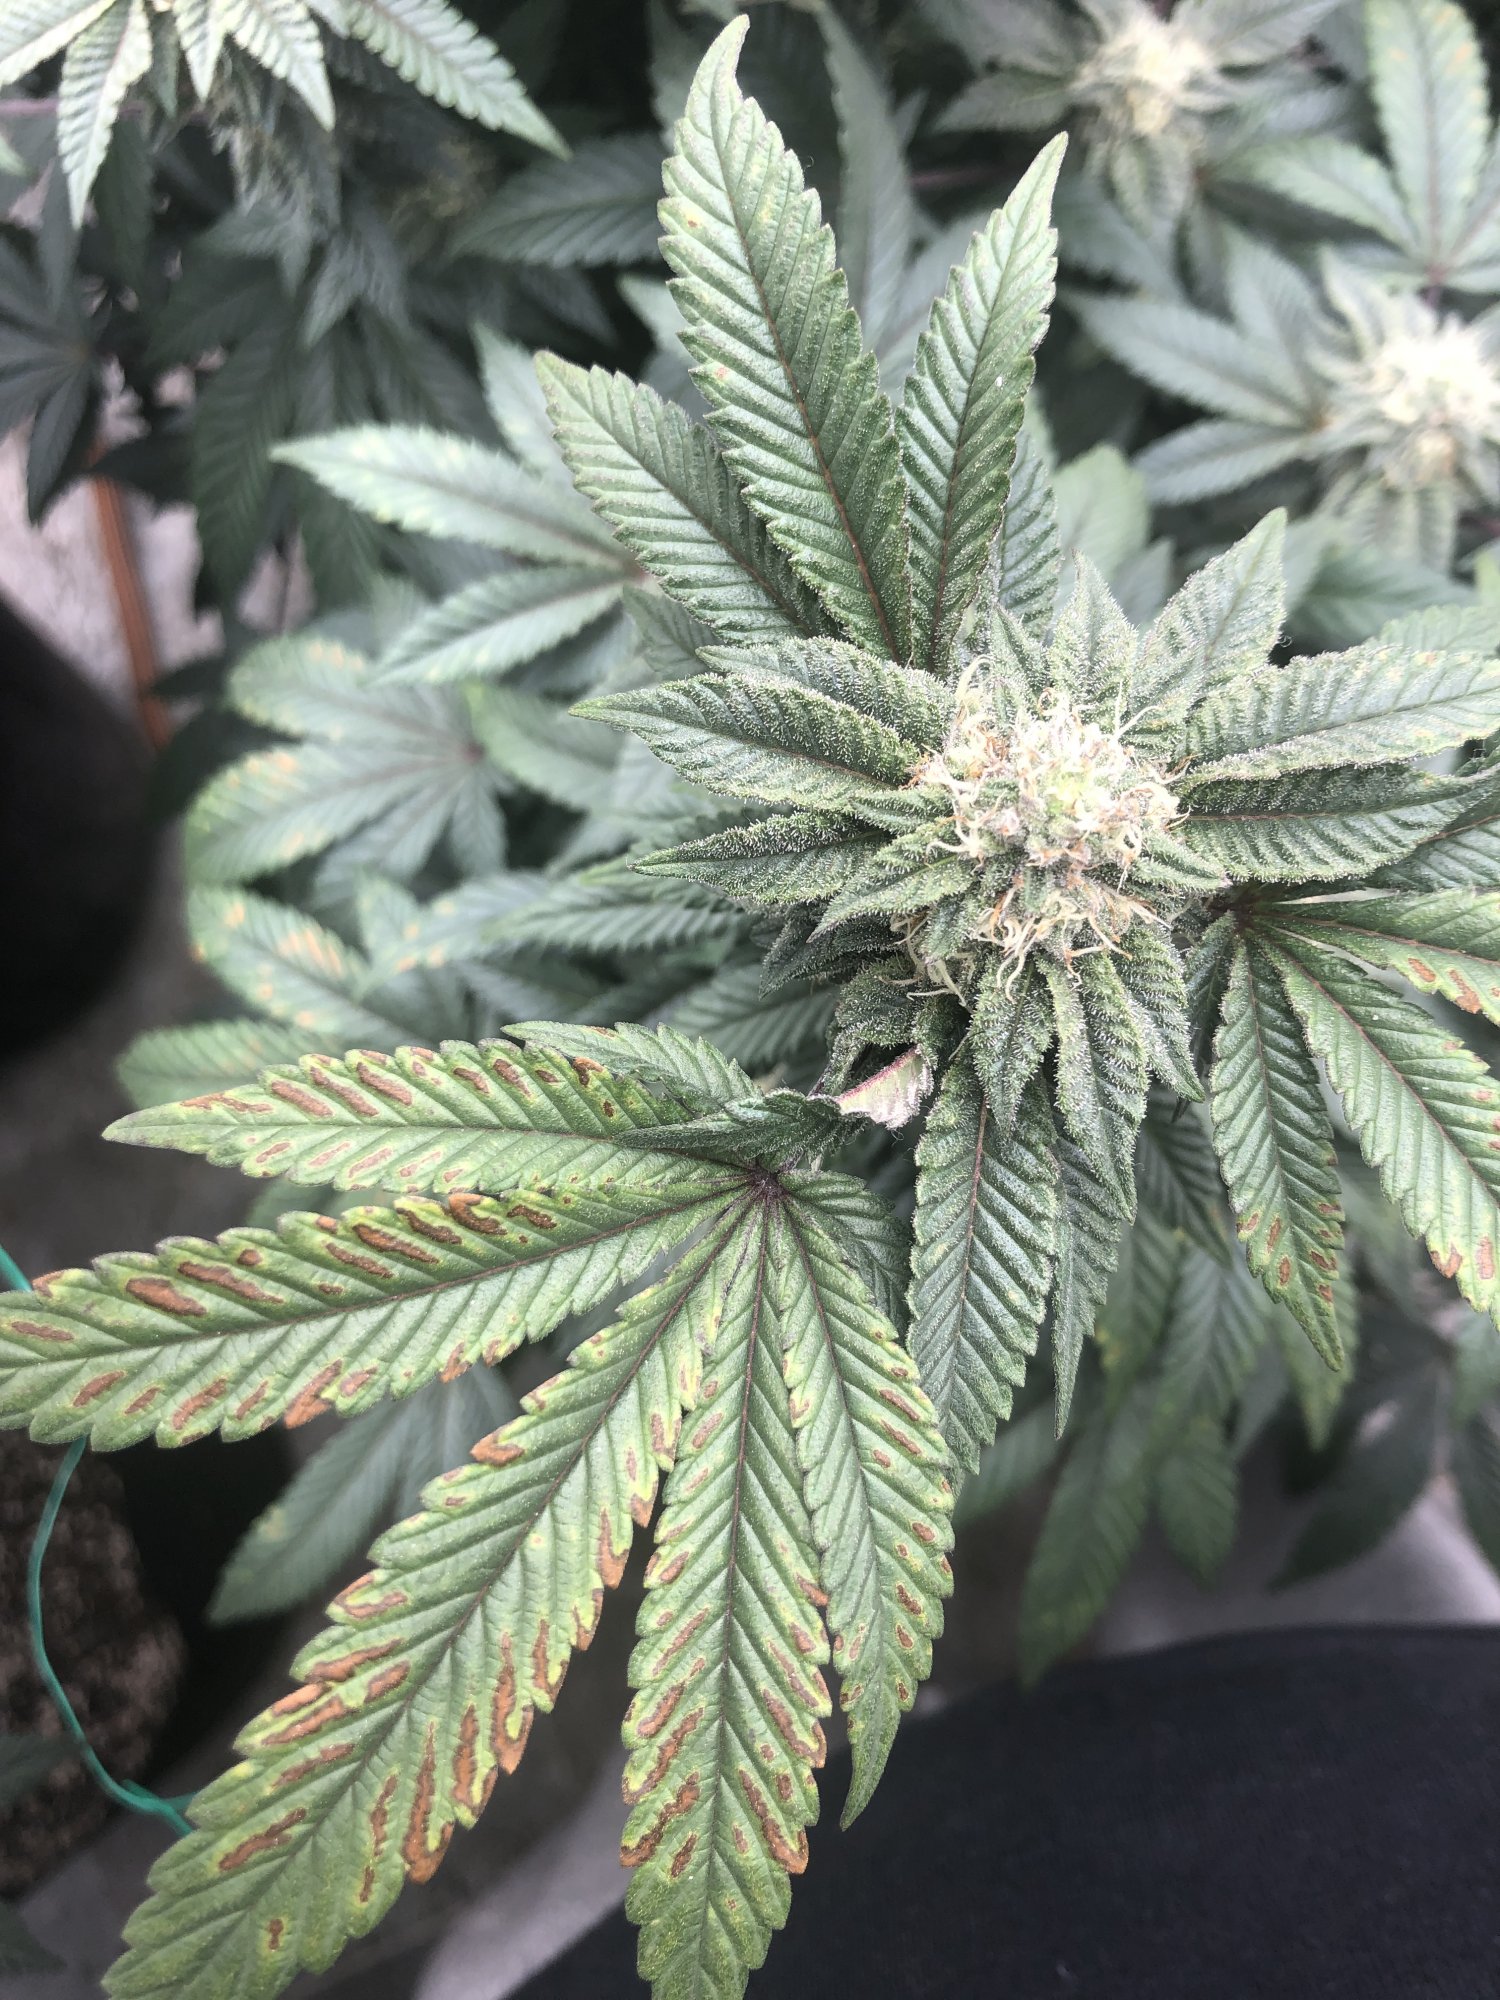 1st time grower need help in week 5 flower discoloration my plants look